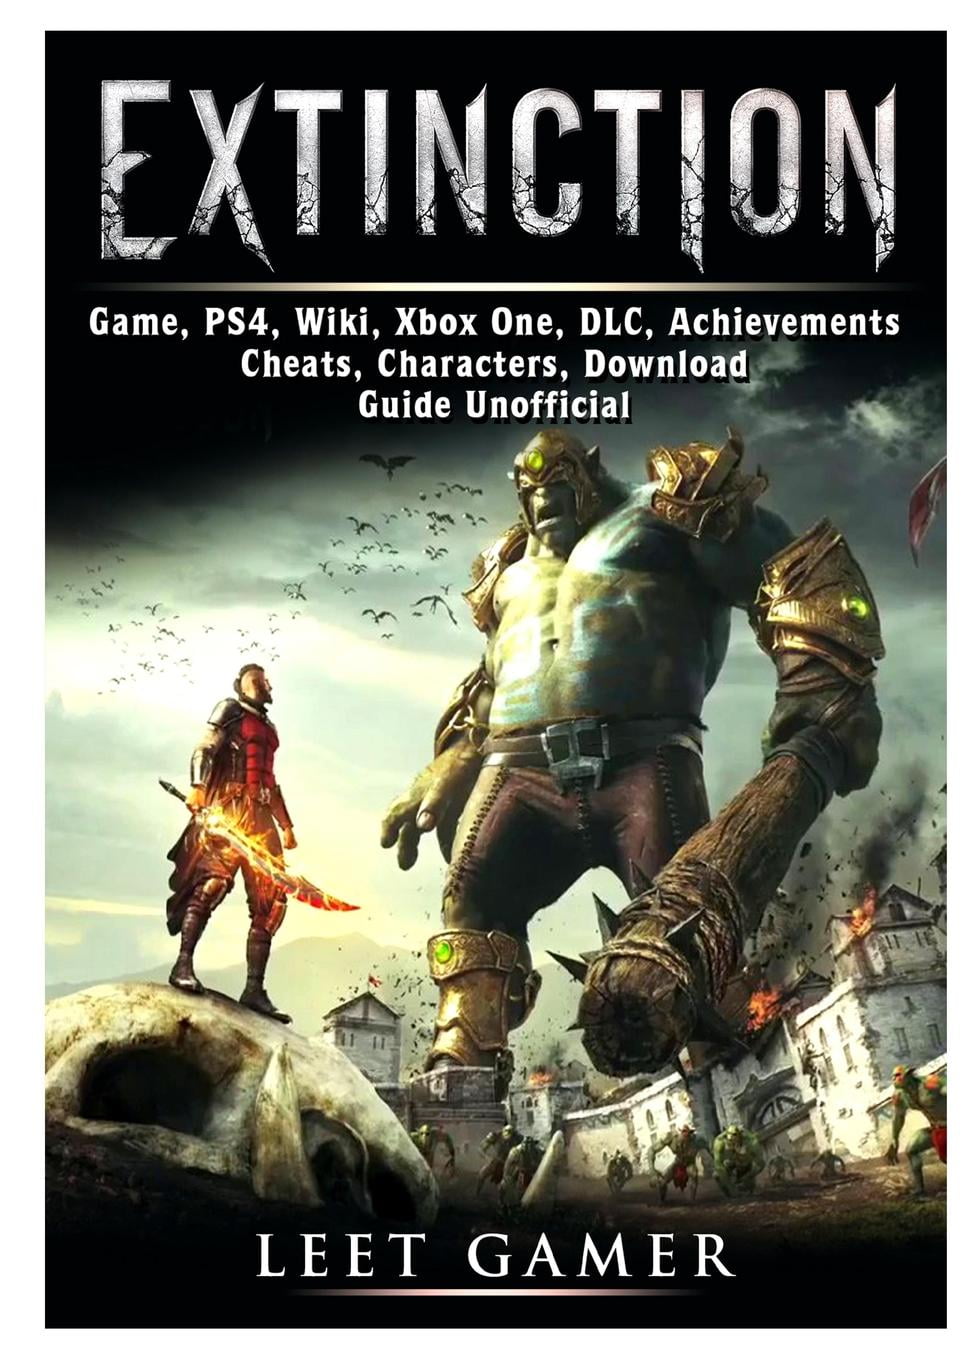 Mew Mew lindring Gør gulvet rent Extinction Game, PS4, Wiki, Xbox One, DLC, Achievements, Cheats,  Characters, Download, Guide Unofficial (Paperback) - Walmart.com